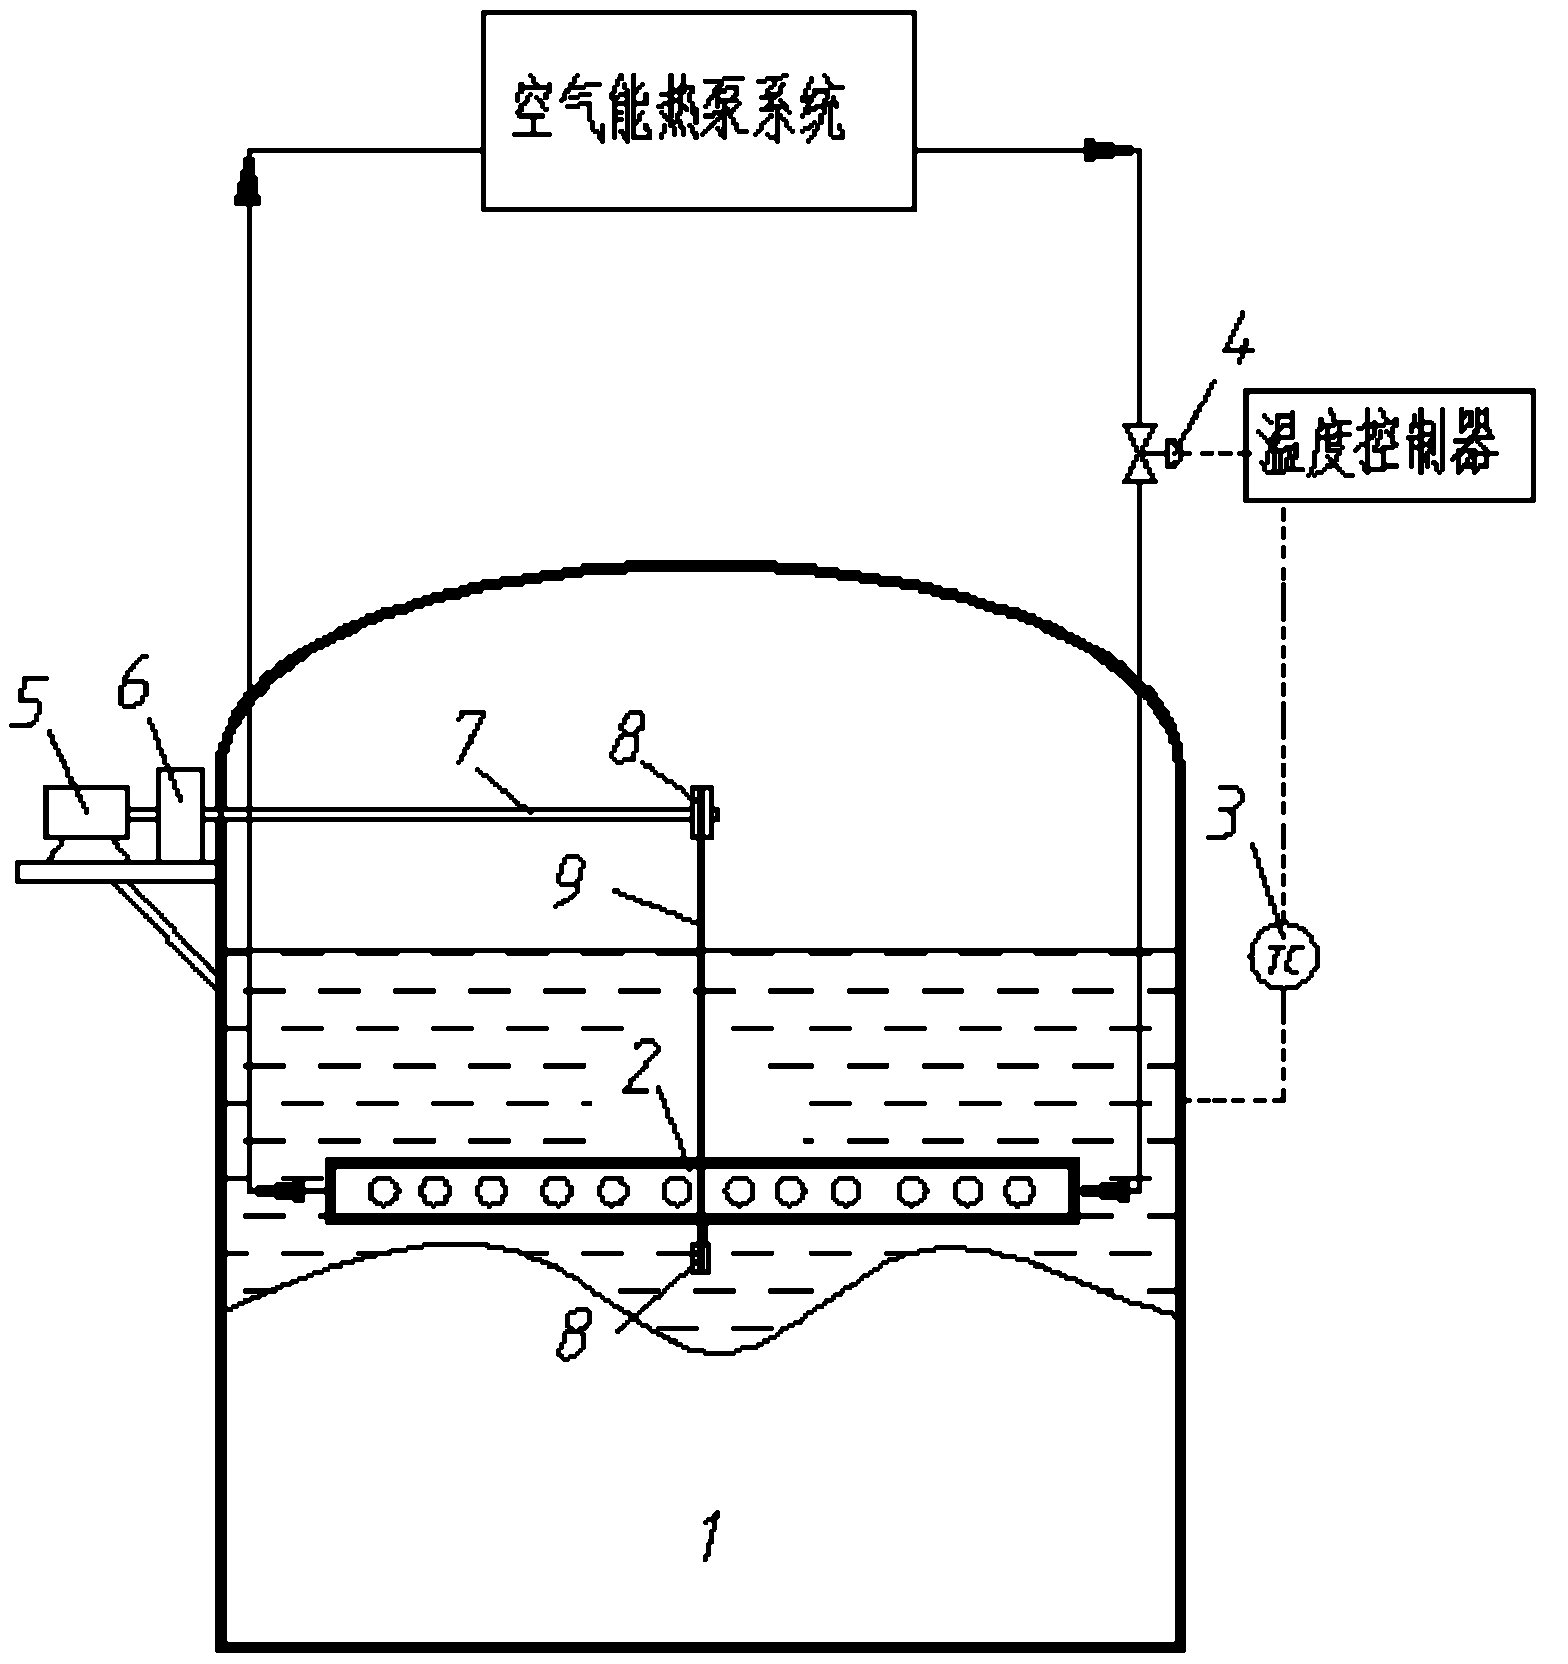 Method and device for intensively stabilizing biogas yield by utilizing air energy heat pump